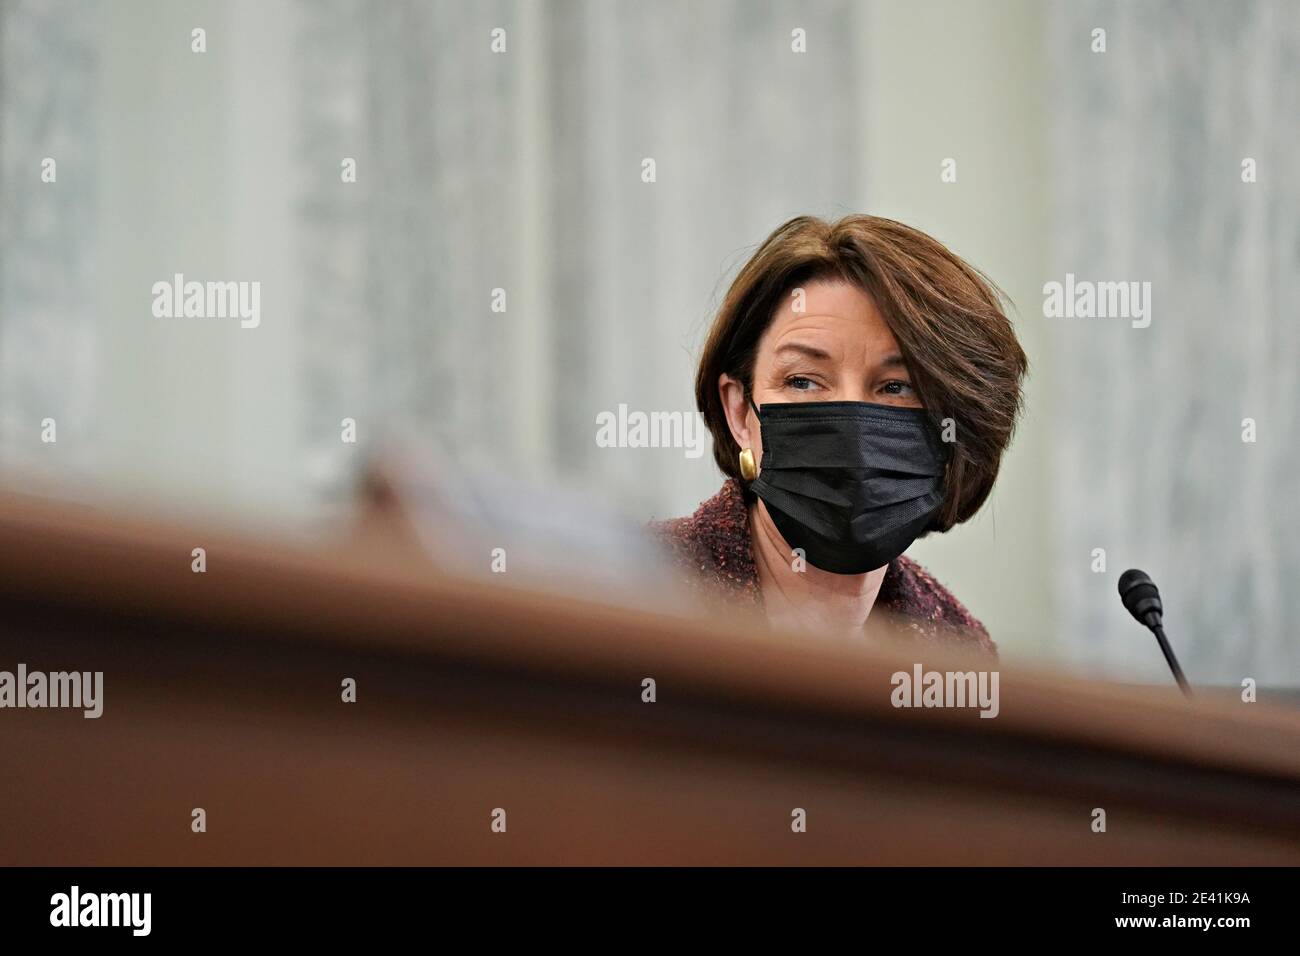 United States Senator Amy Klobuchar (Democrat of Minnesota), wears a protective mask during a Senate Commerce, Science and Transportation Committee confirmation hearing for U.S. Secretary of Transportation nominee Pete Buttigieg in Washington, DC, U.S., on Thursday, Jan. 21, 2021. Buttigieg, is pledging to carry out the administration's ambitious agenda to rebuild the nation's infrastructure, calling it a 'generational opportunity' to create new jobs, fight economic inequality and stem climate change. Credit: Stefani Reynolds/Pool via CNP | usage worldwide Stock Photo